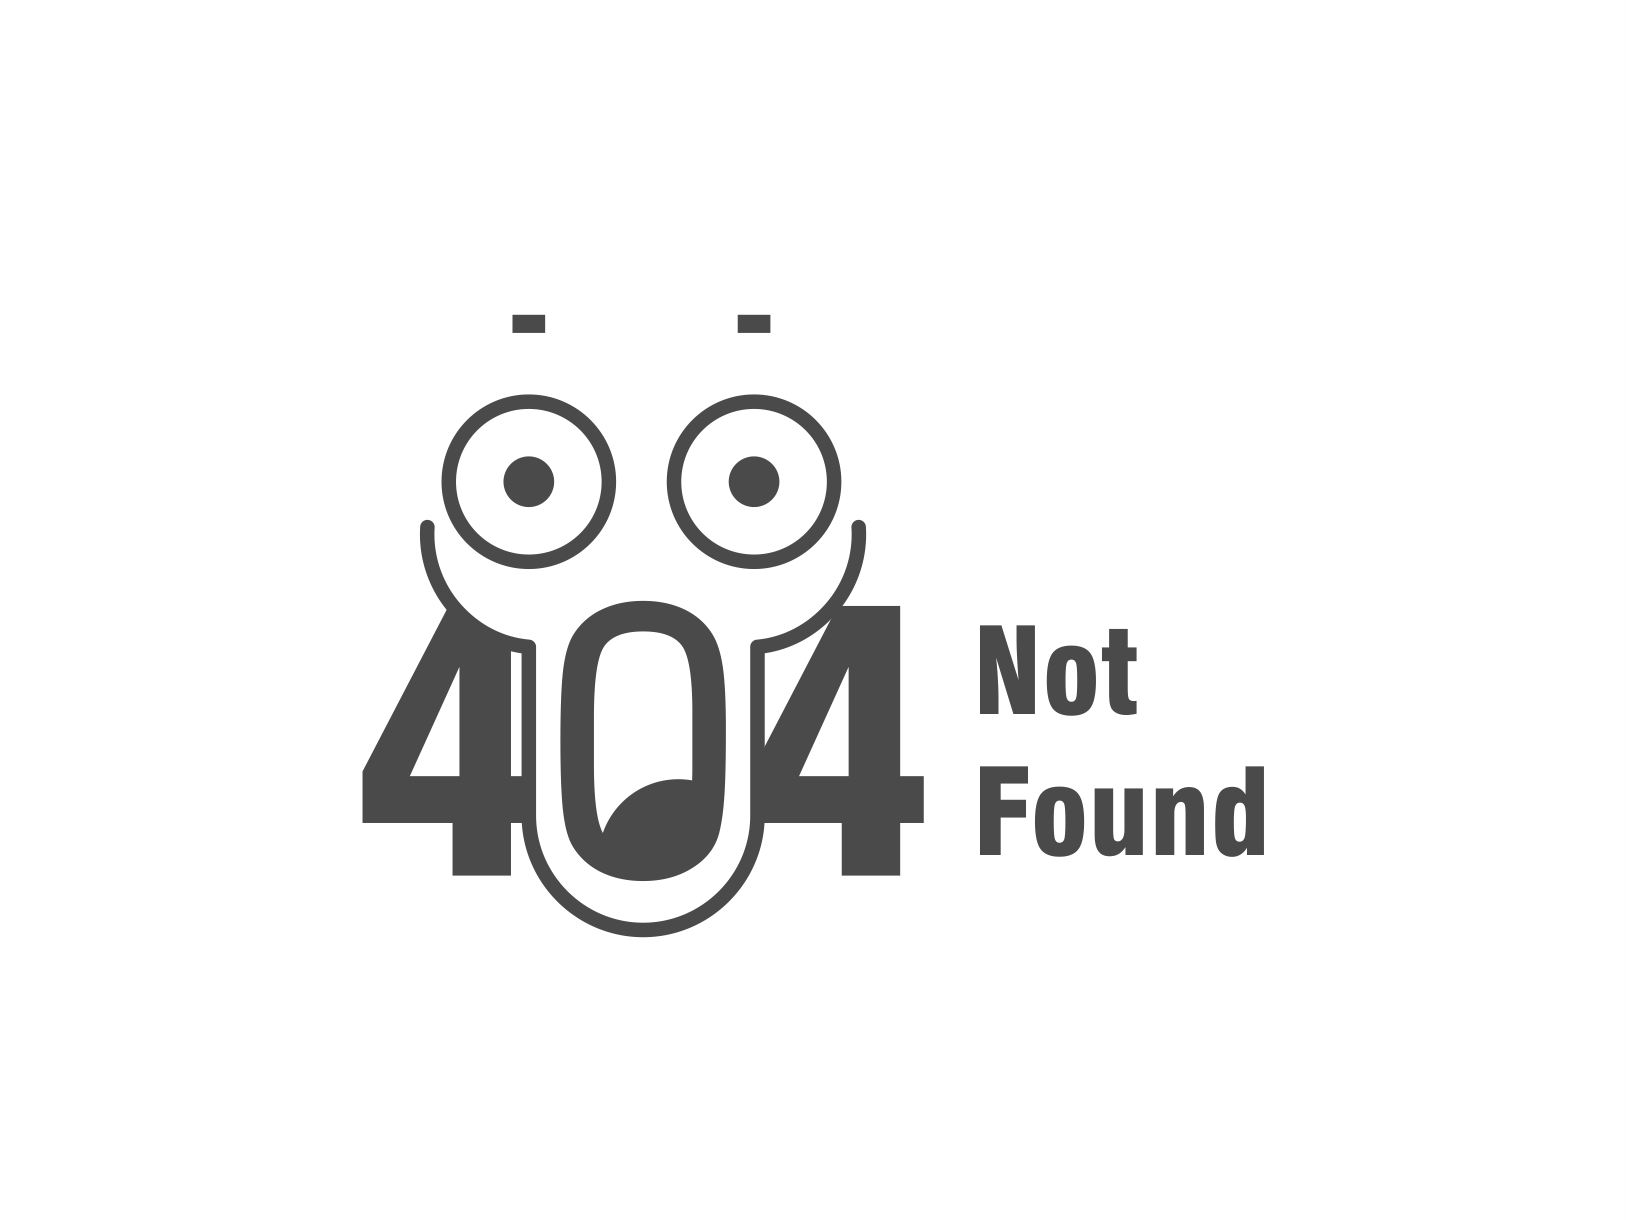 Shop not found. 404 Not found. Аватарка not found. 404 Аватарка. 404 Not found картинка.